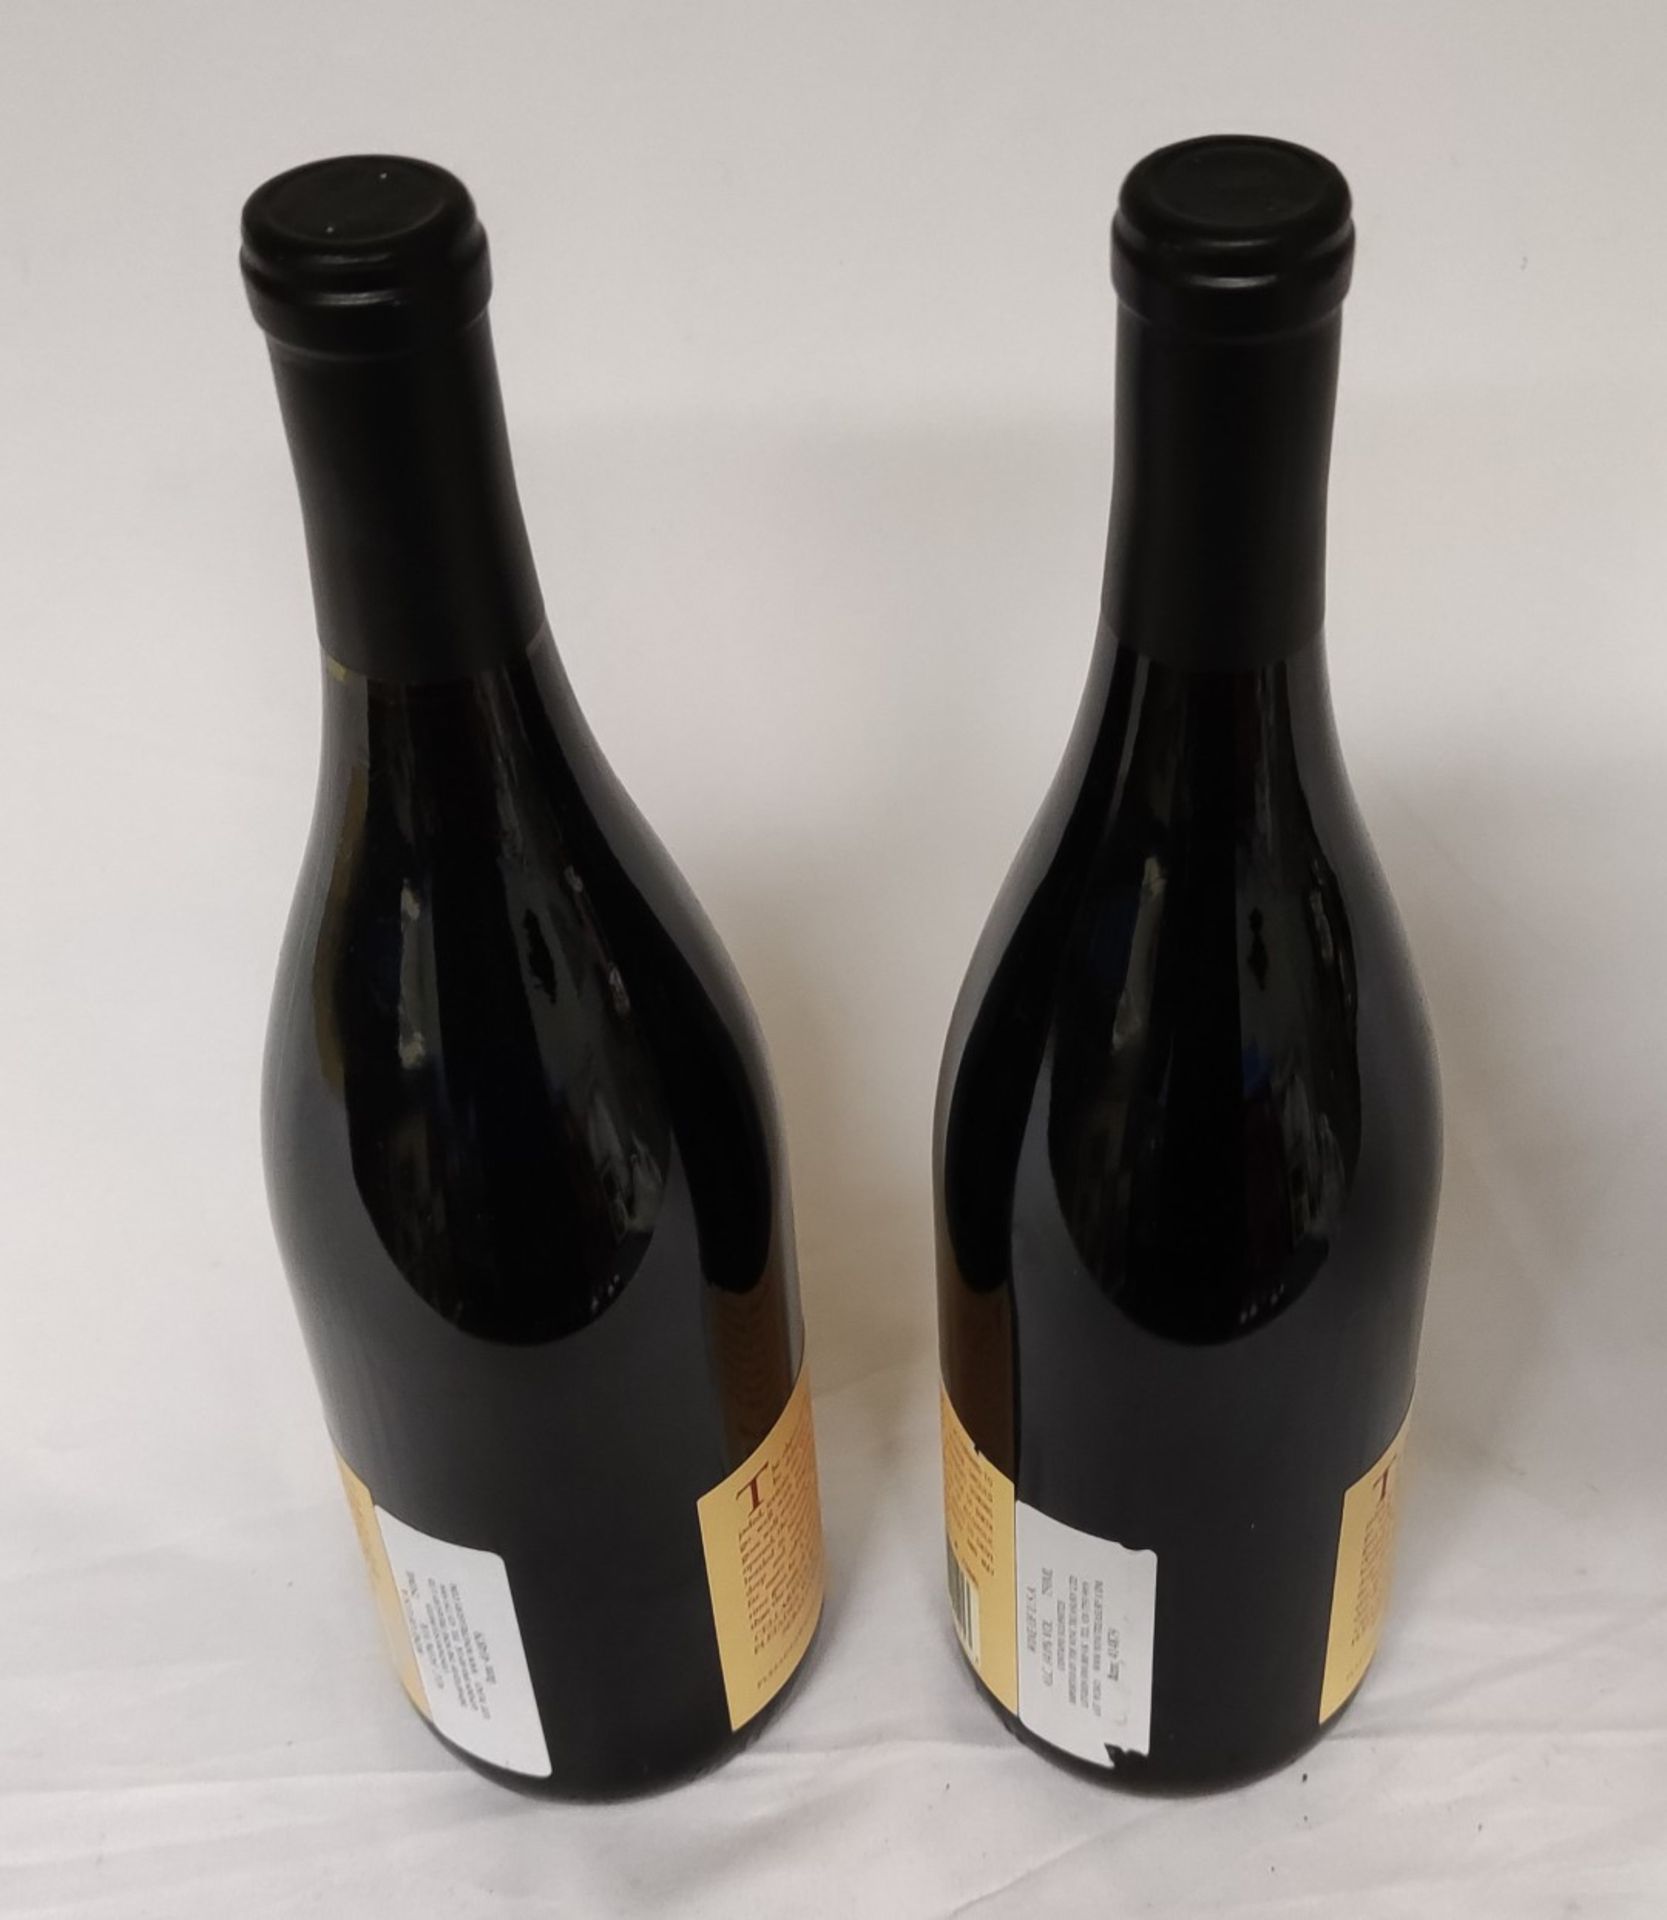 2 x Bottles of Pleiades XXVIII Old Vines Thackery &amp; Co California Red Wine - RRP £70 - Image 2 of 7